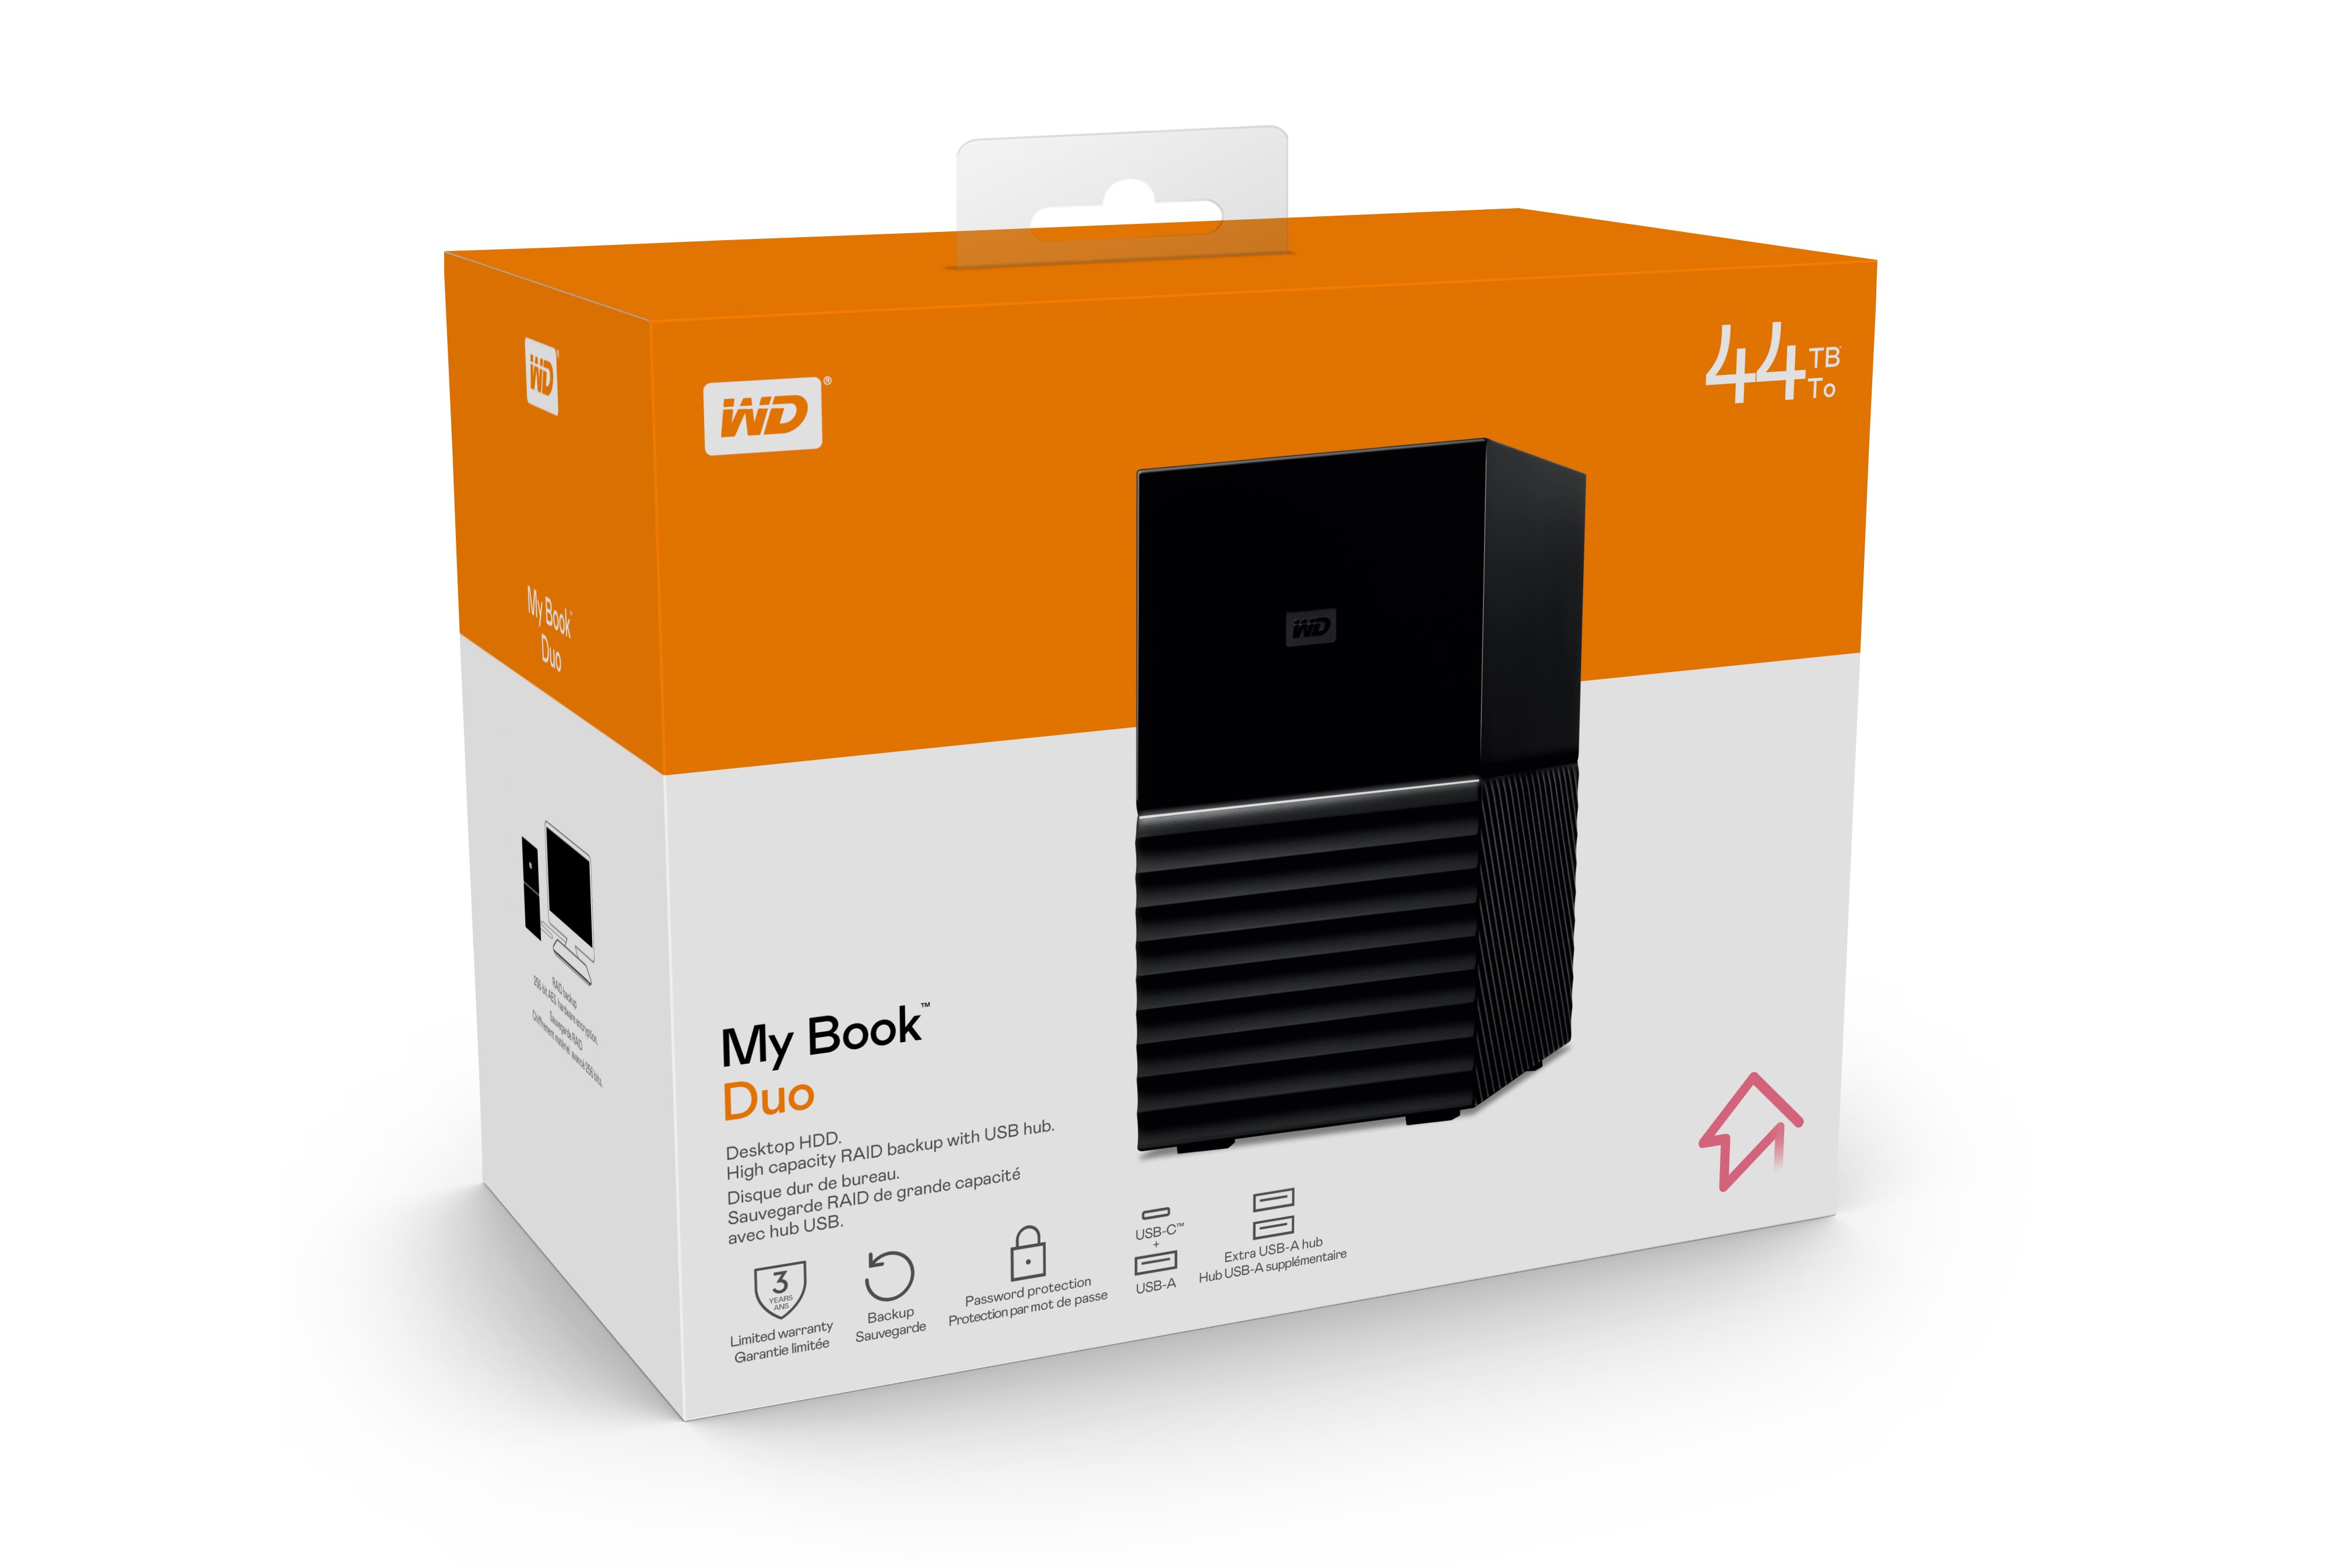 Western Digital Launches 22 TB HDD for Consumers in Updated My